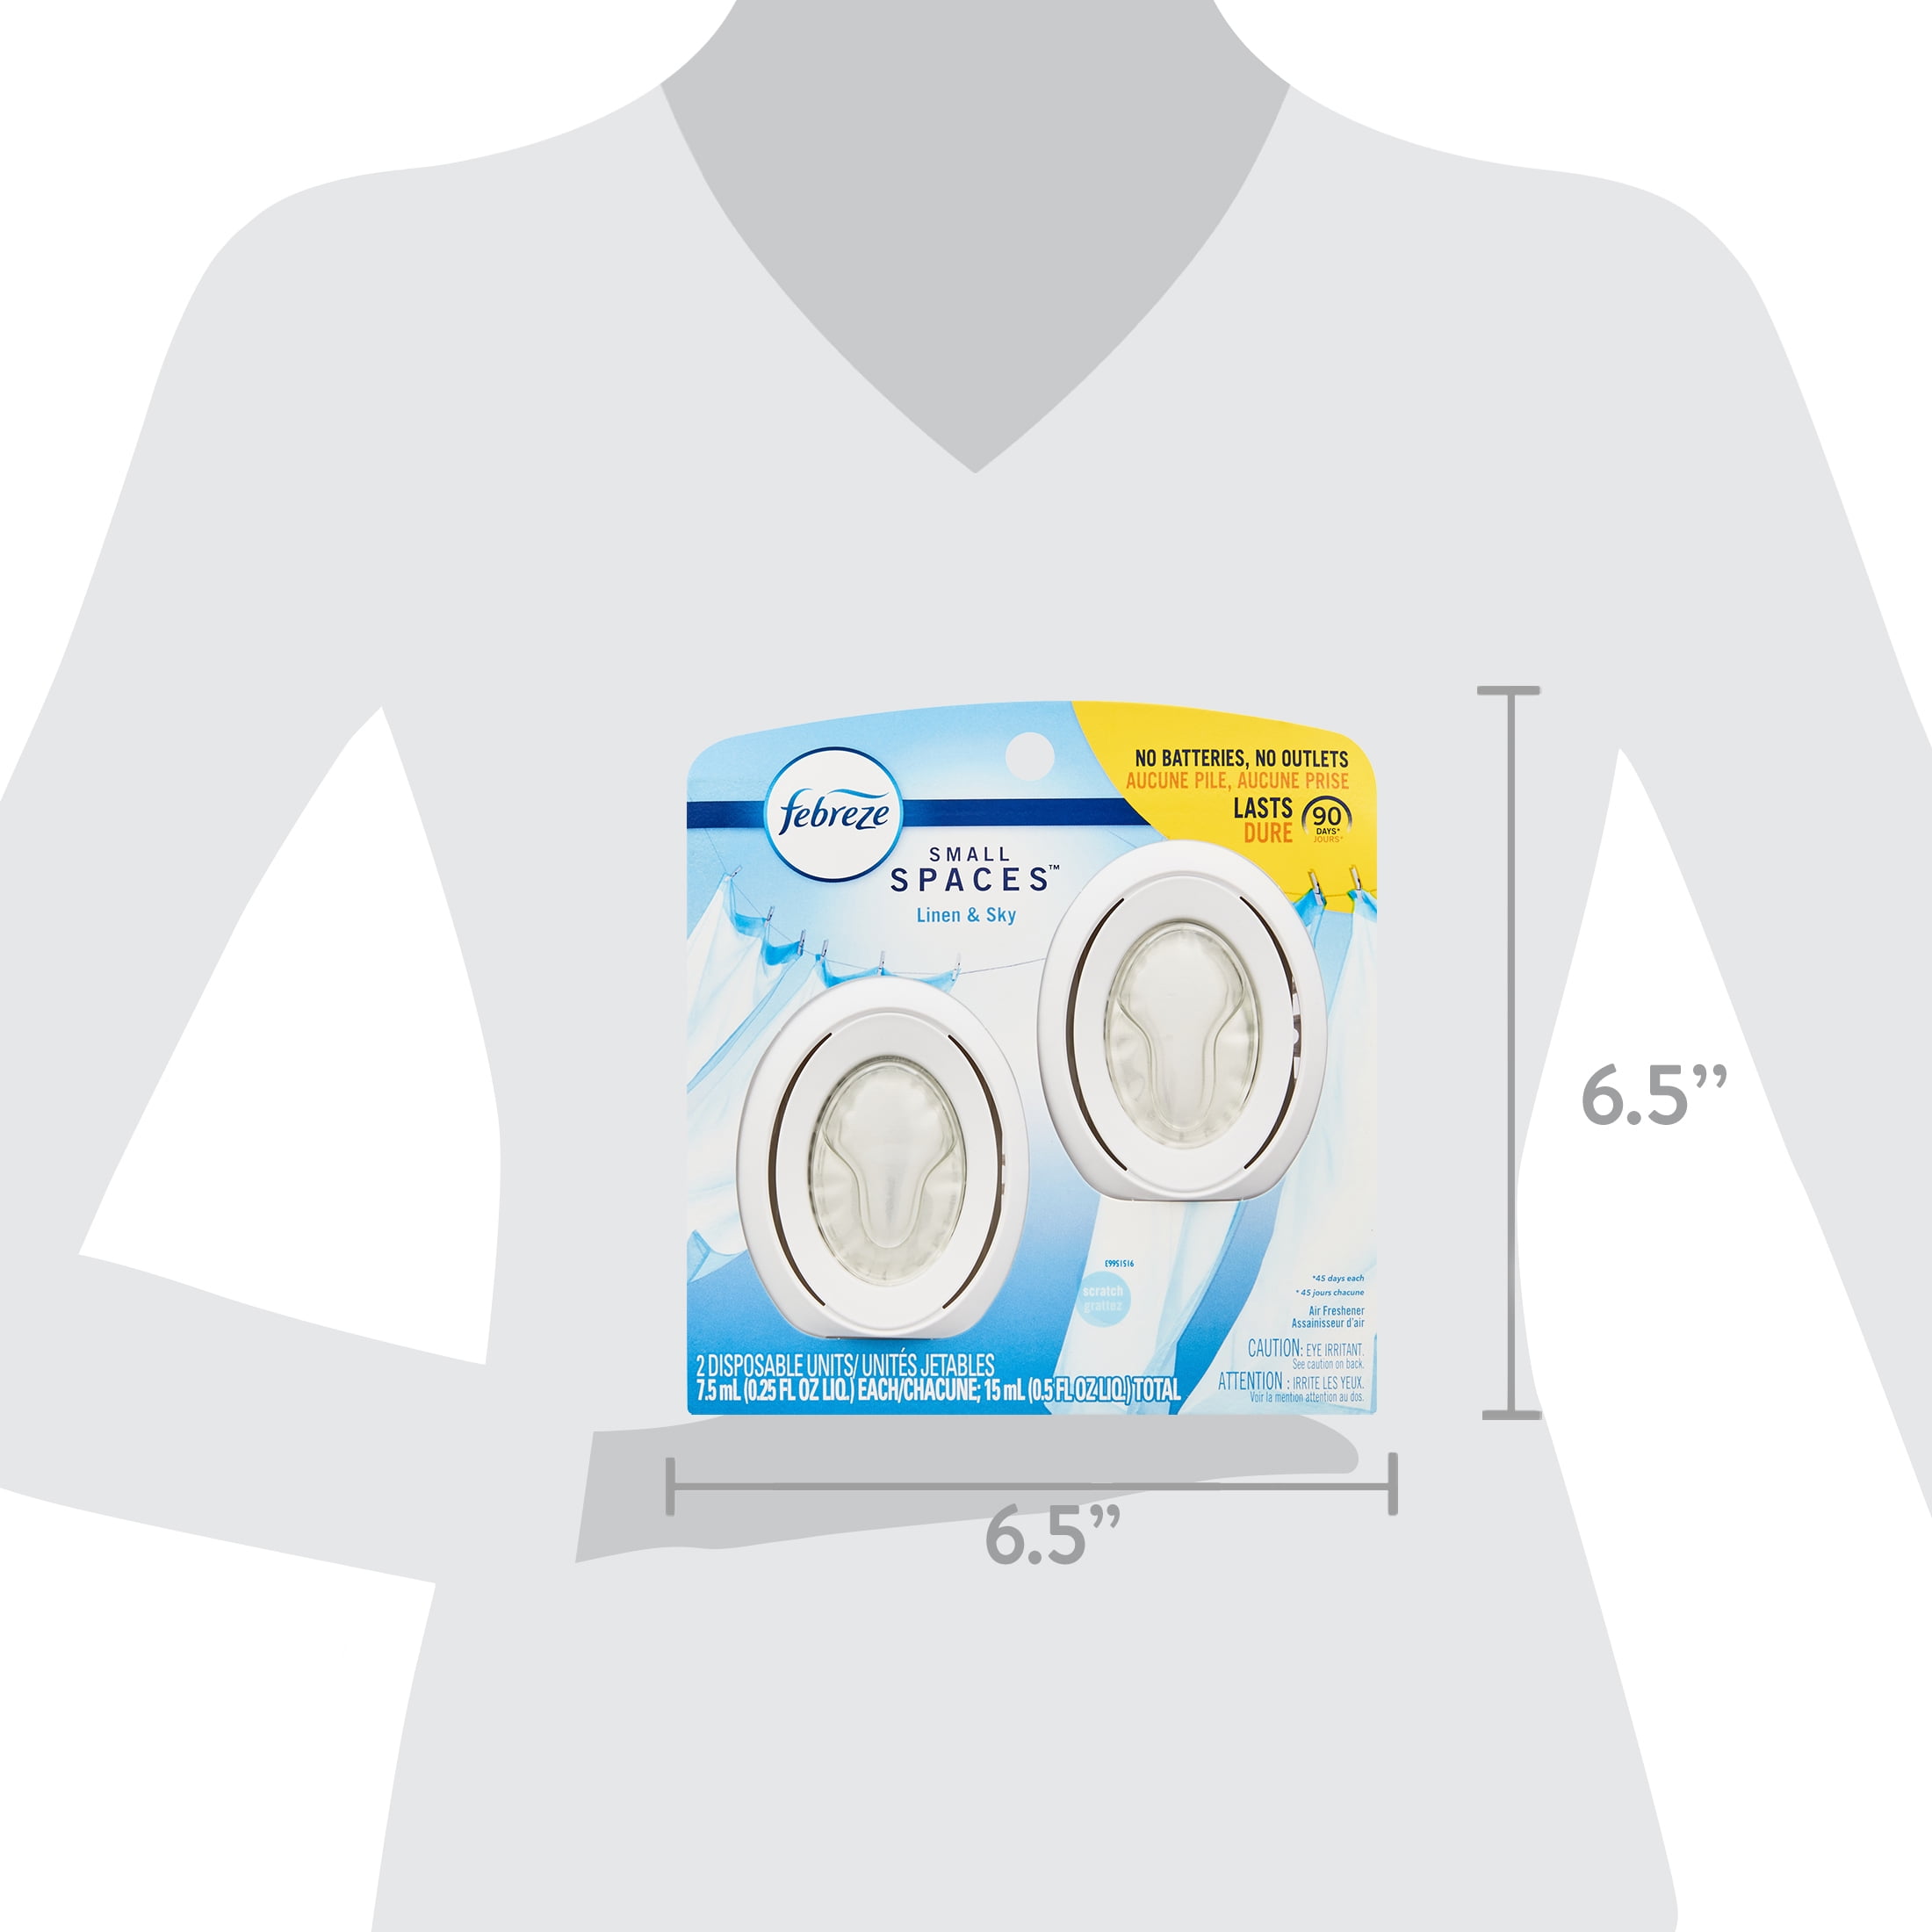 Febreze Small Spaces Air Freshener, With Gain Scent, Original - 2 pack, 7.5 ml each